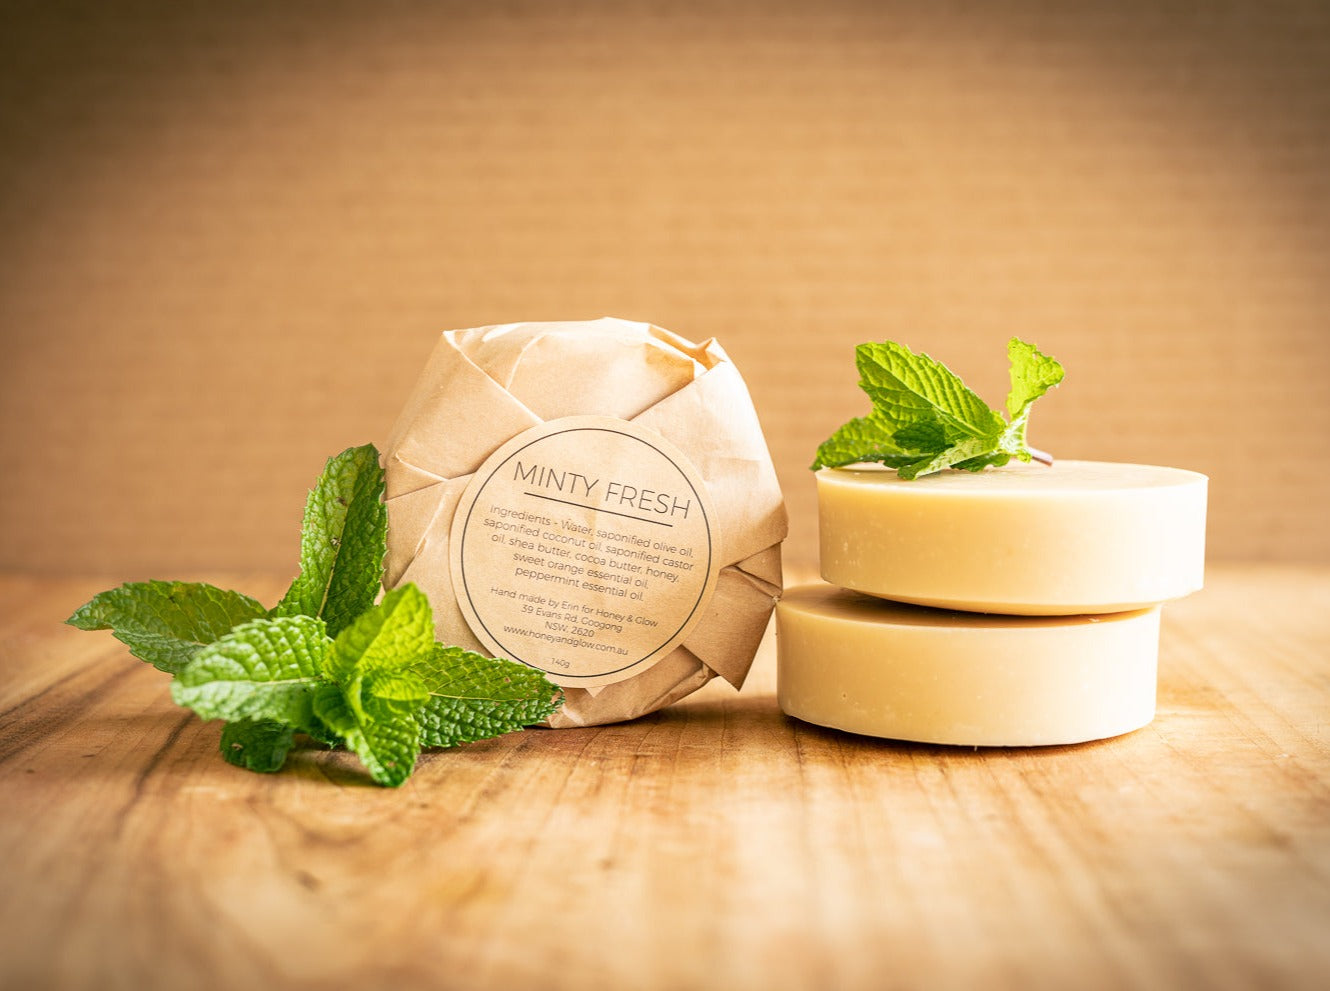 A pack of round soap wrapped in brown paper is propped next to two unwrapped round bars of soap. The label on the pack says Minty Fresh by Honey and Glow. There are sprigs of mint to the left and on top of the bars.